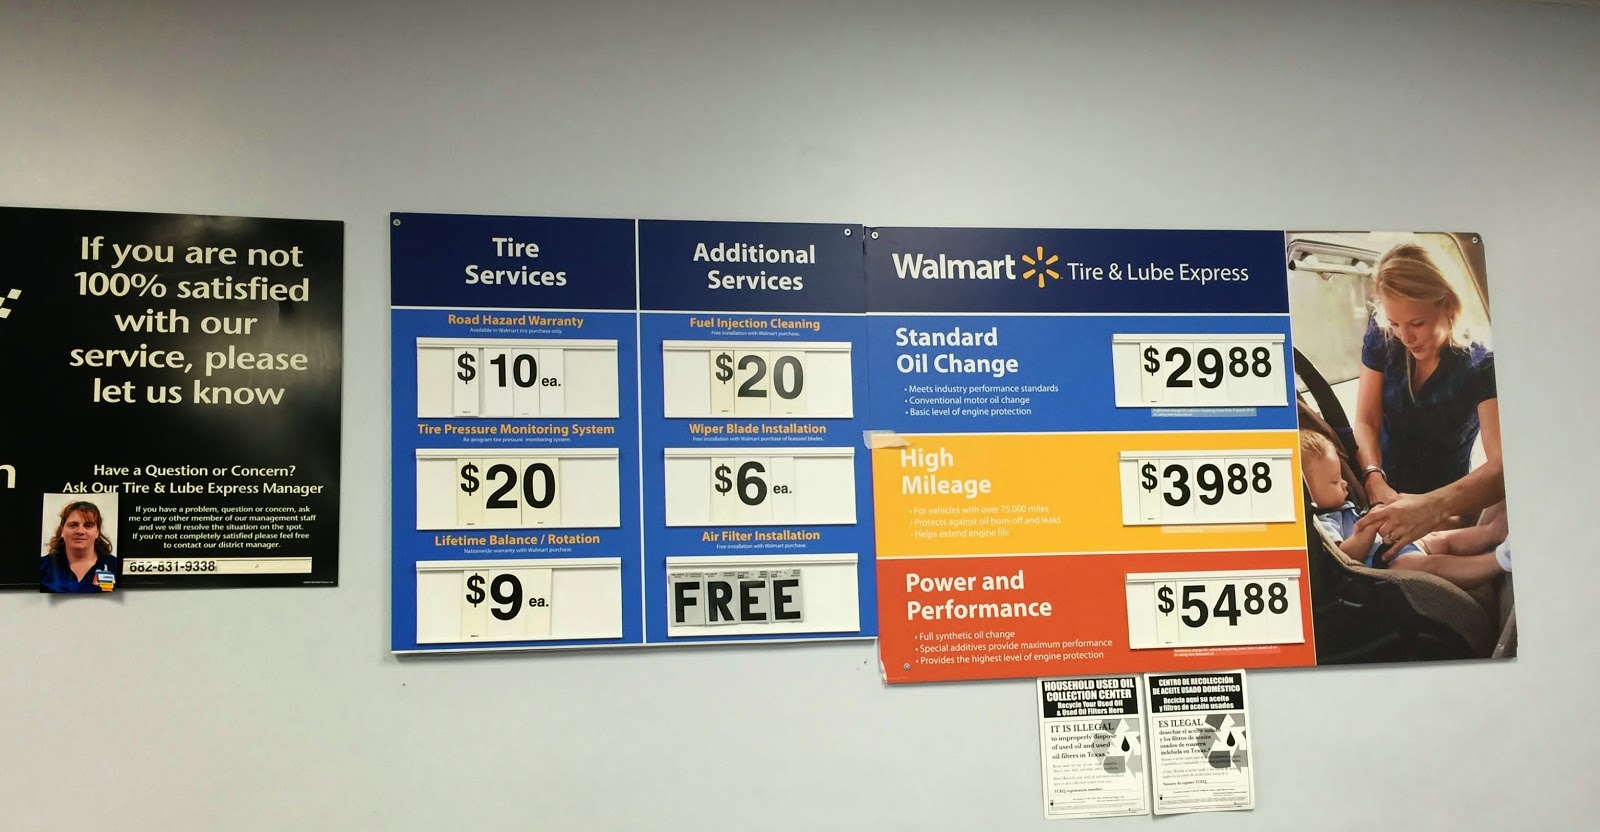 How Much Is An Oil Change At Walmart